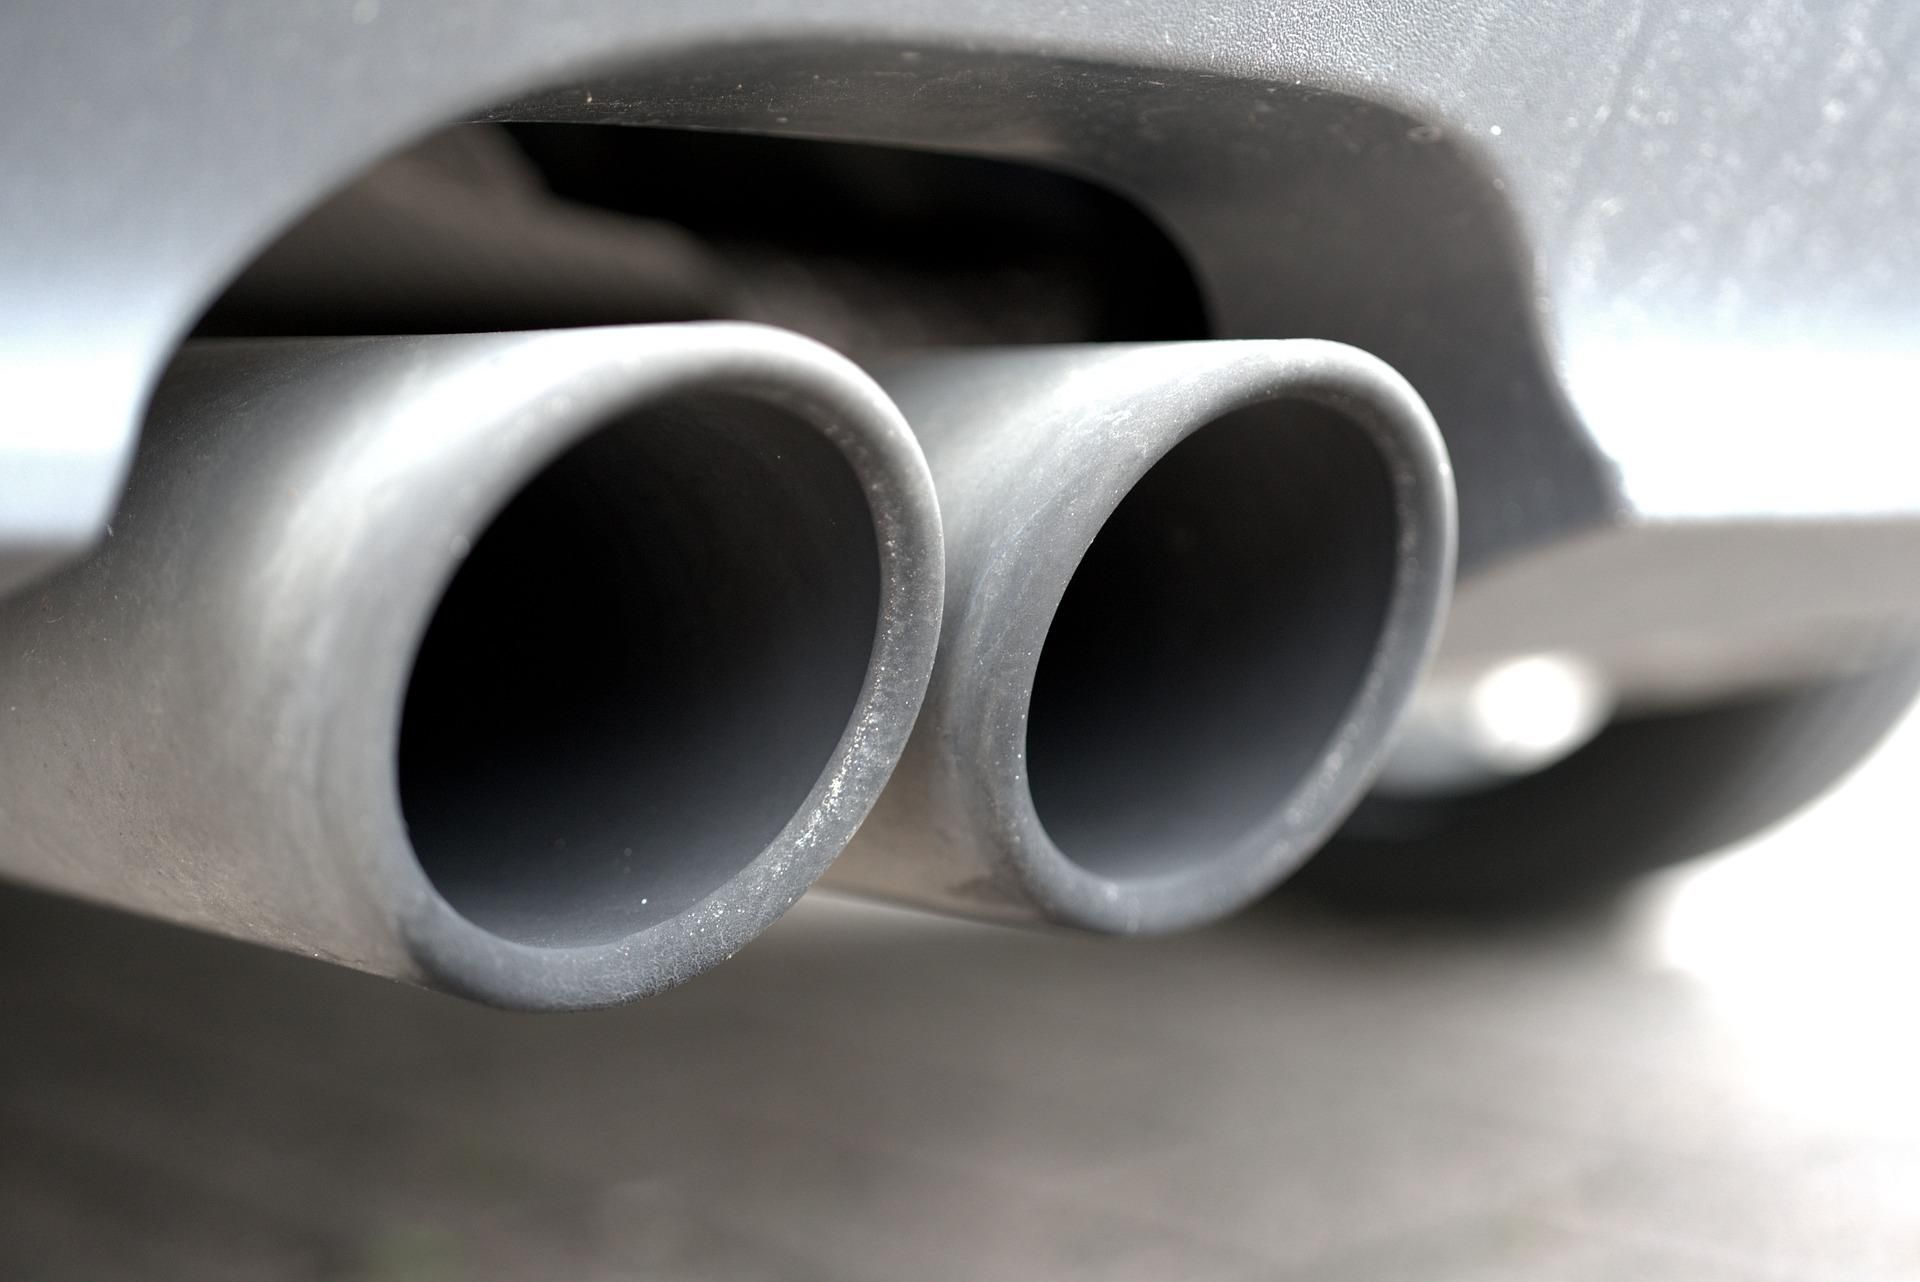 A close-up of a vehicle's dual exhaust pipes